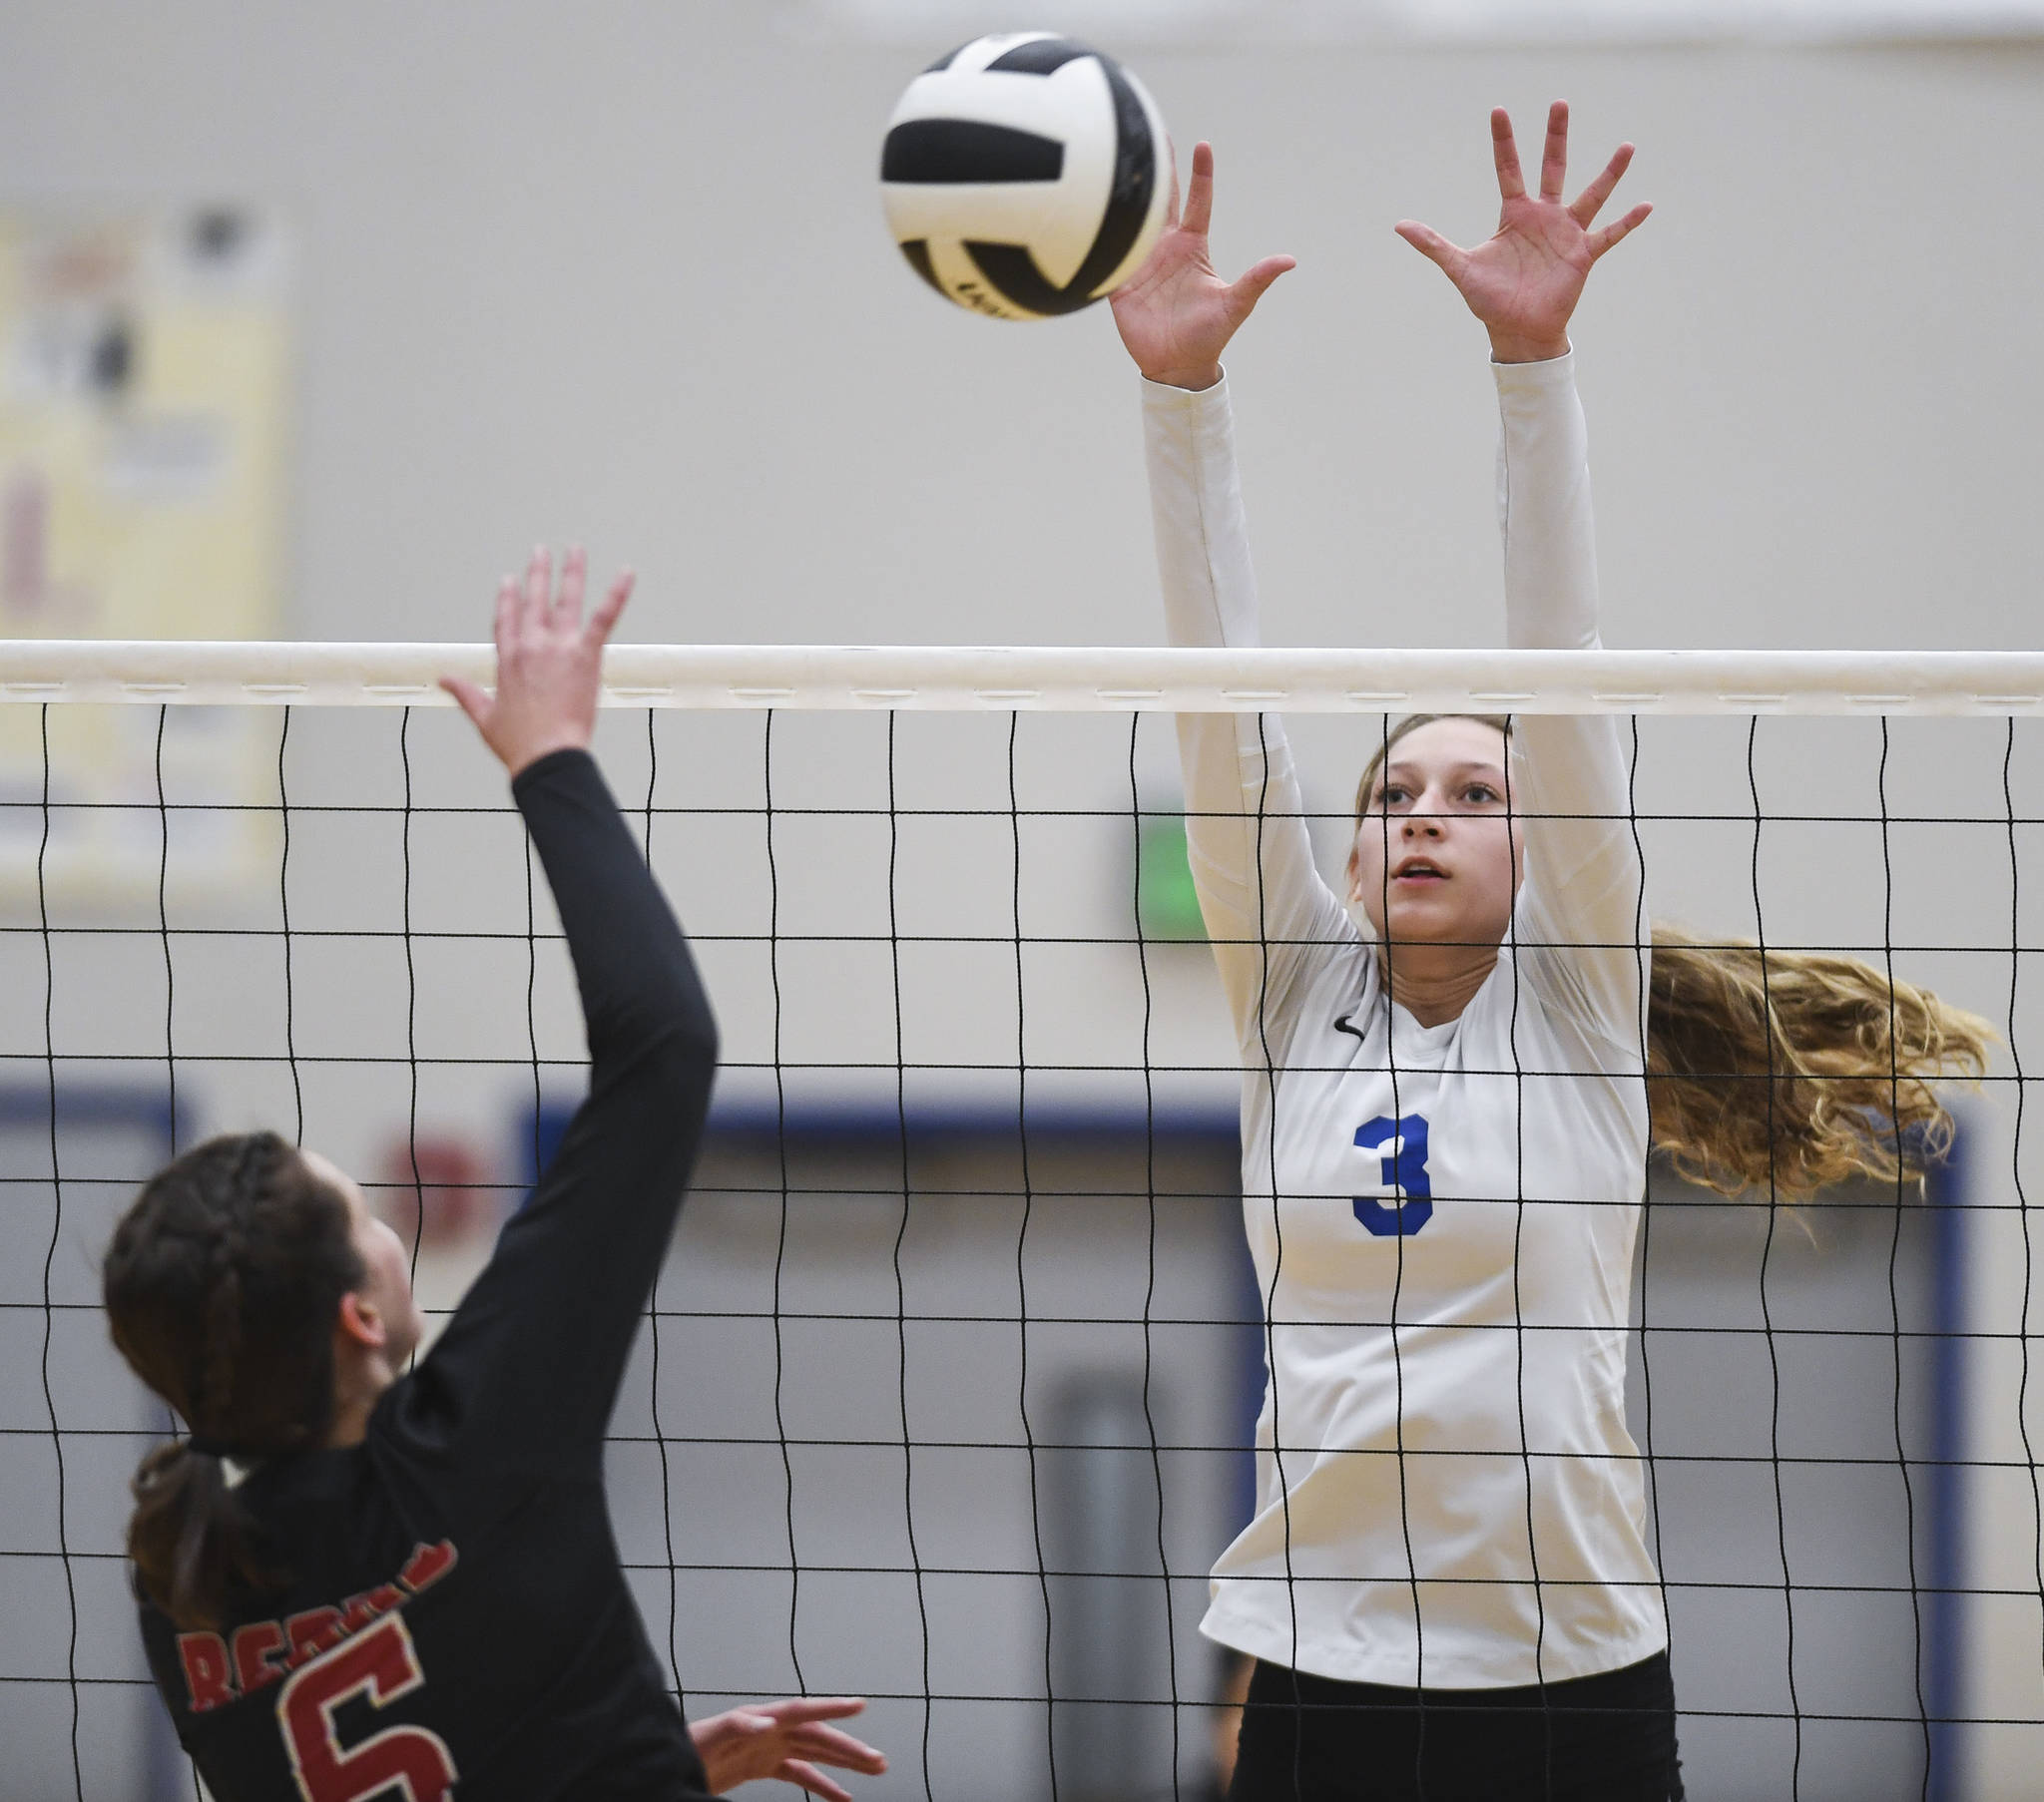 Thunder Mountain’s Lily Smith, right, attempts a block against Juneau-Douglas’ Addie Prussing at Thunder Mountain High School on Friday, Oct. 4, 2019. (Michael Penn | Juneau Empire)